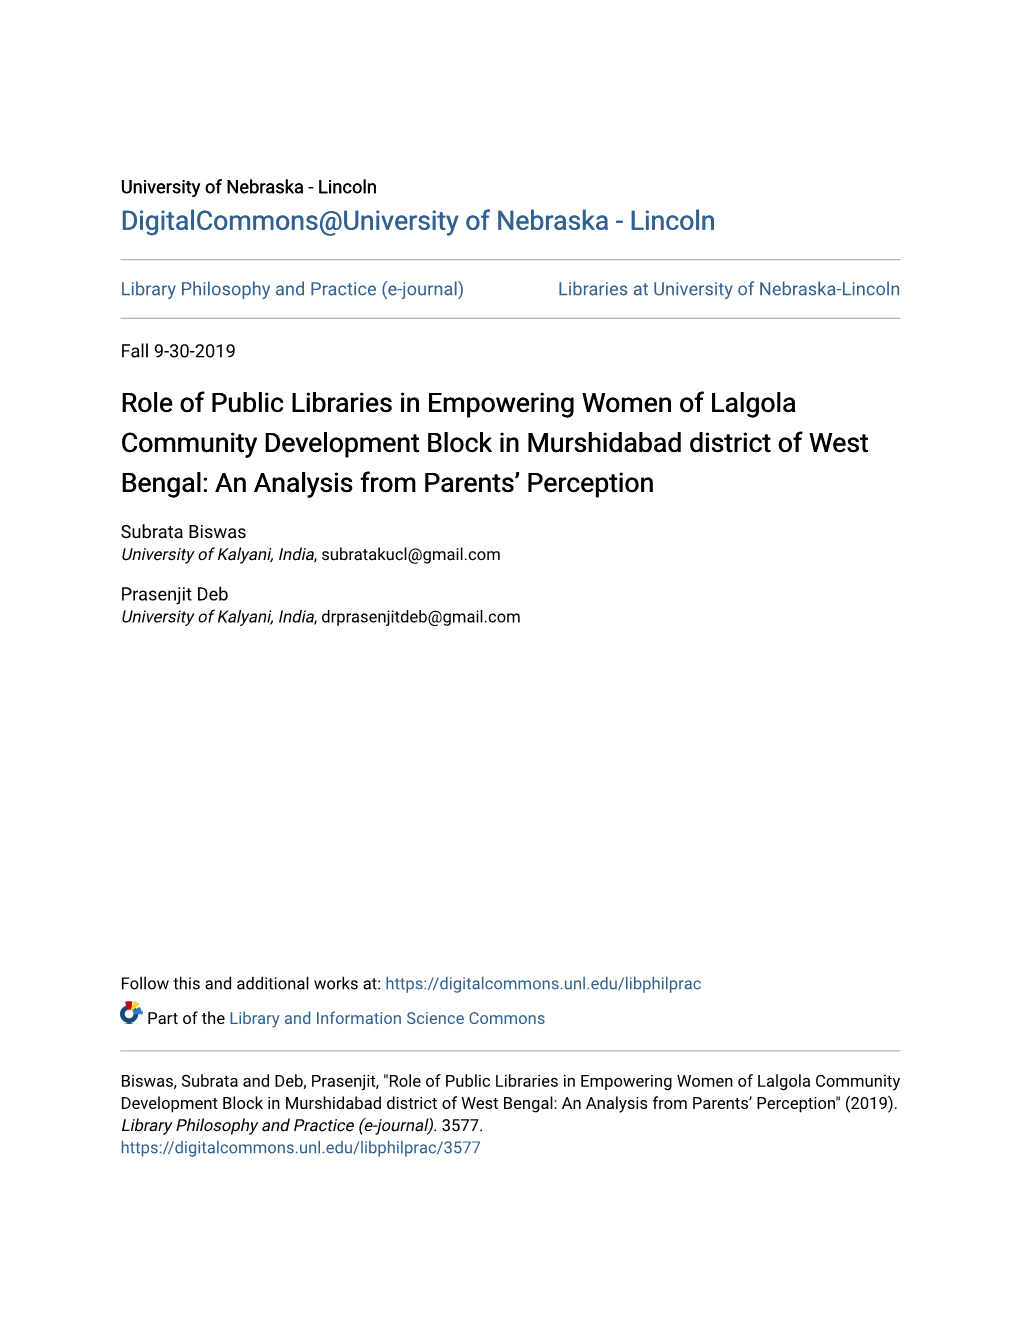 Role of Public Libraries in Empowering Women of Lalgola Community Development Block in Murshidabad District of West Bengal: an Analysis from Parents’ Perception